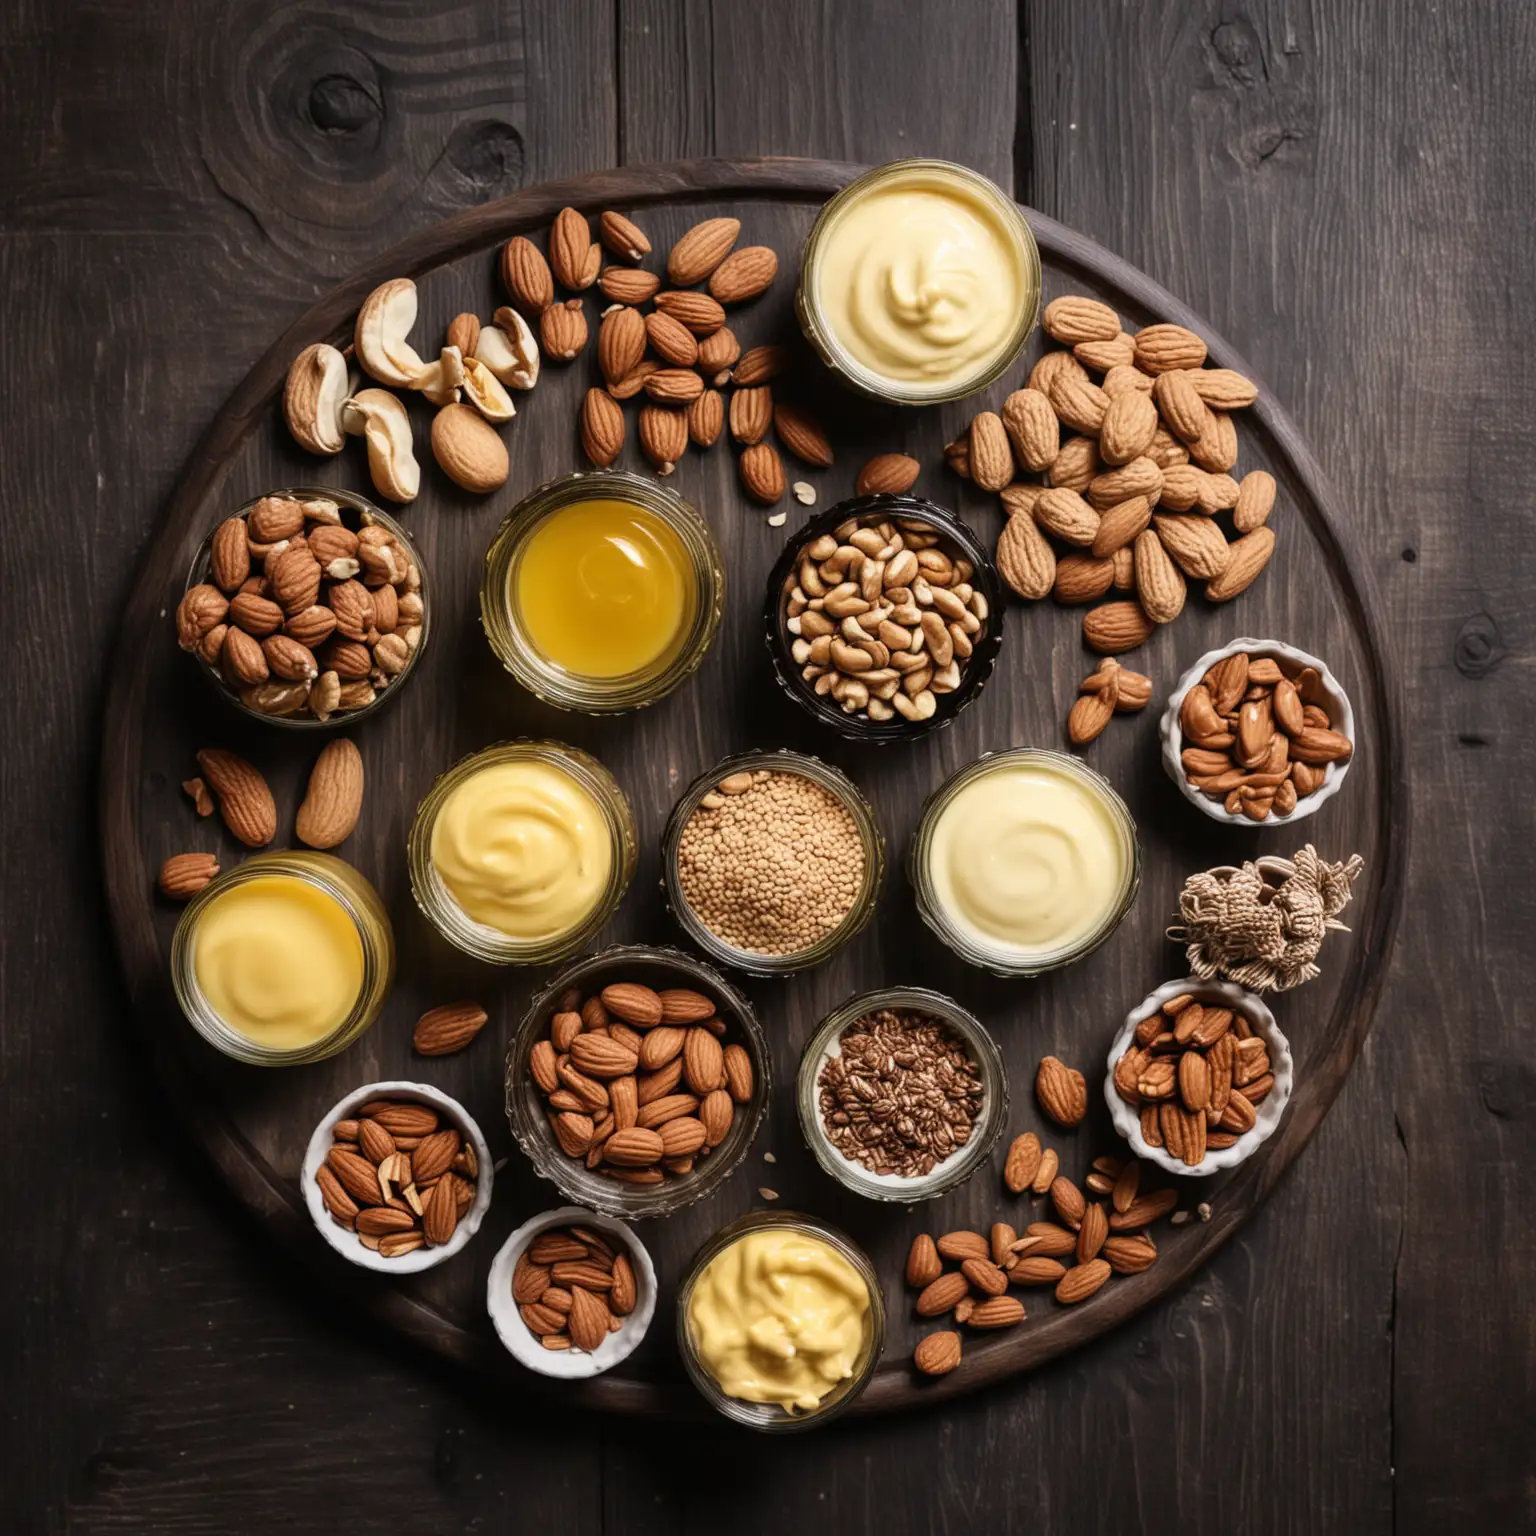 Appetizing Seed and Nut Arrangement on Dark Wooden Table